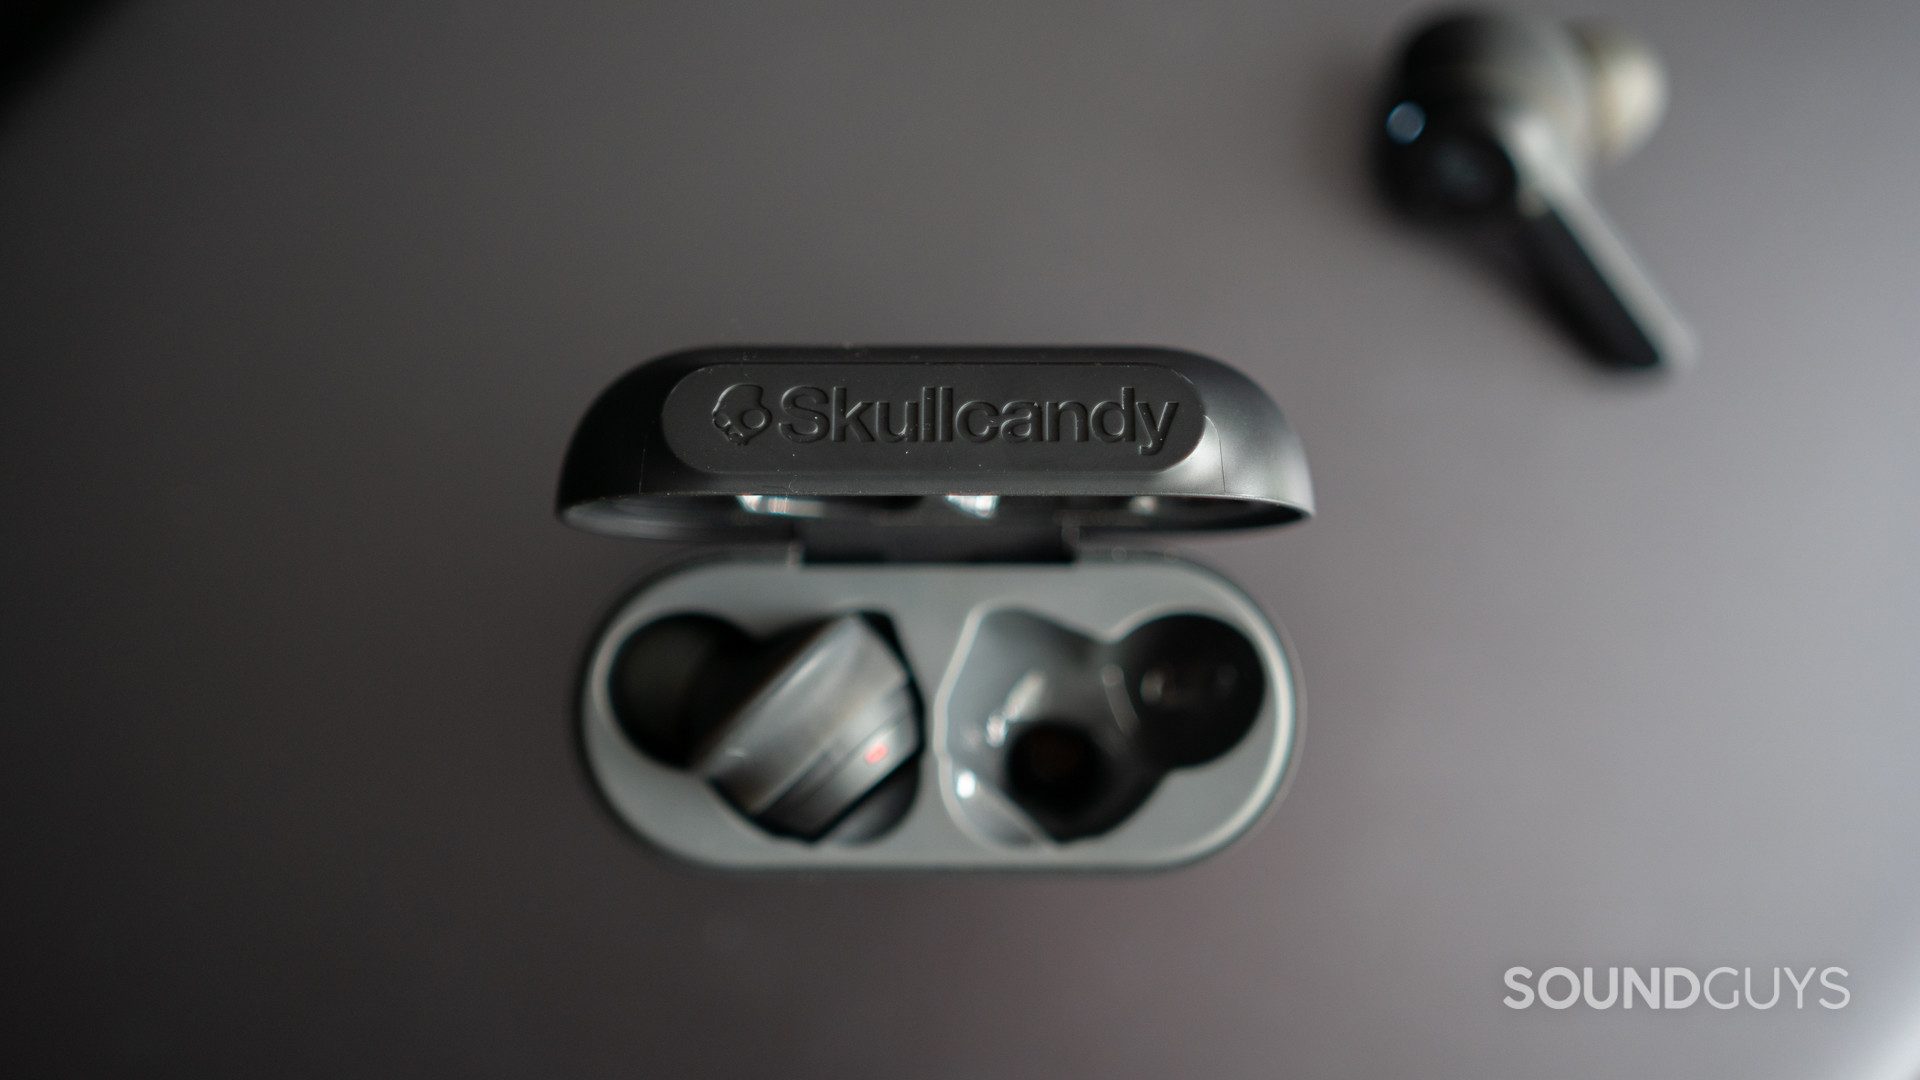 The open Skullcandy Indy charging case showing the cutouts for each earbud.